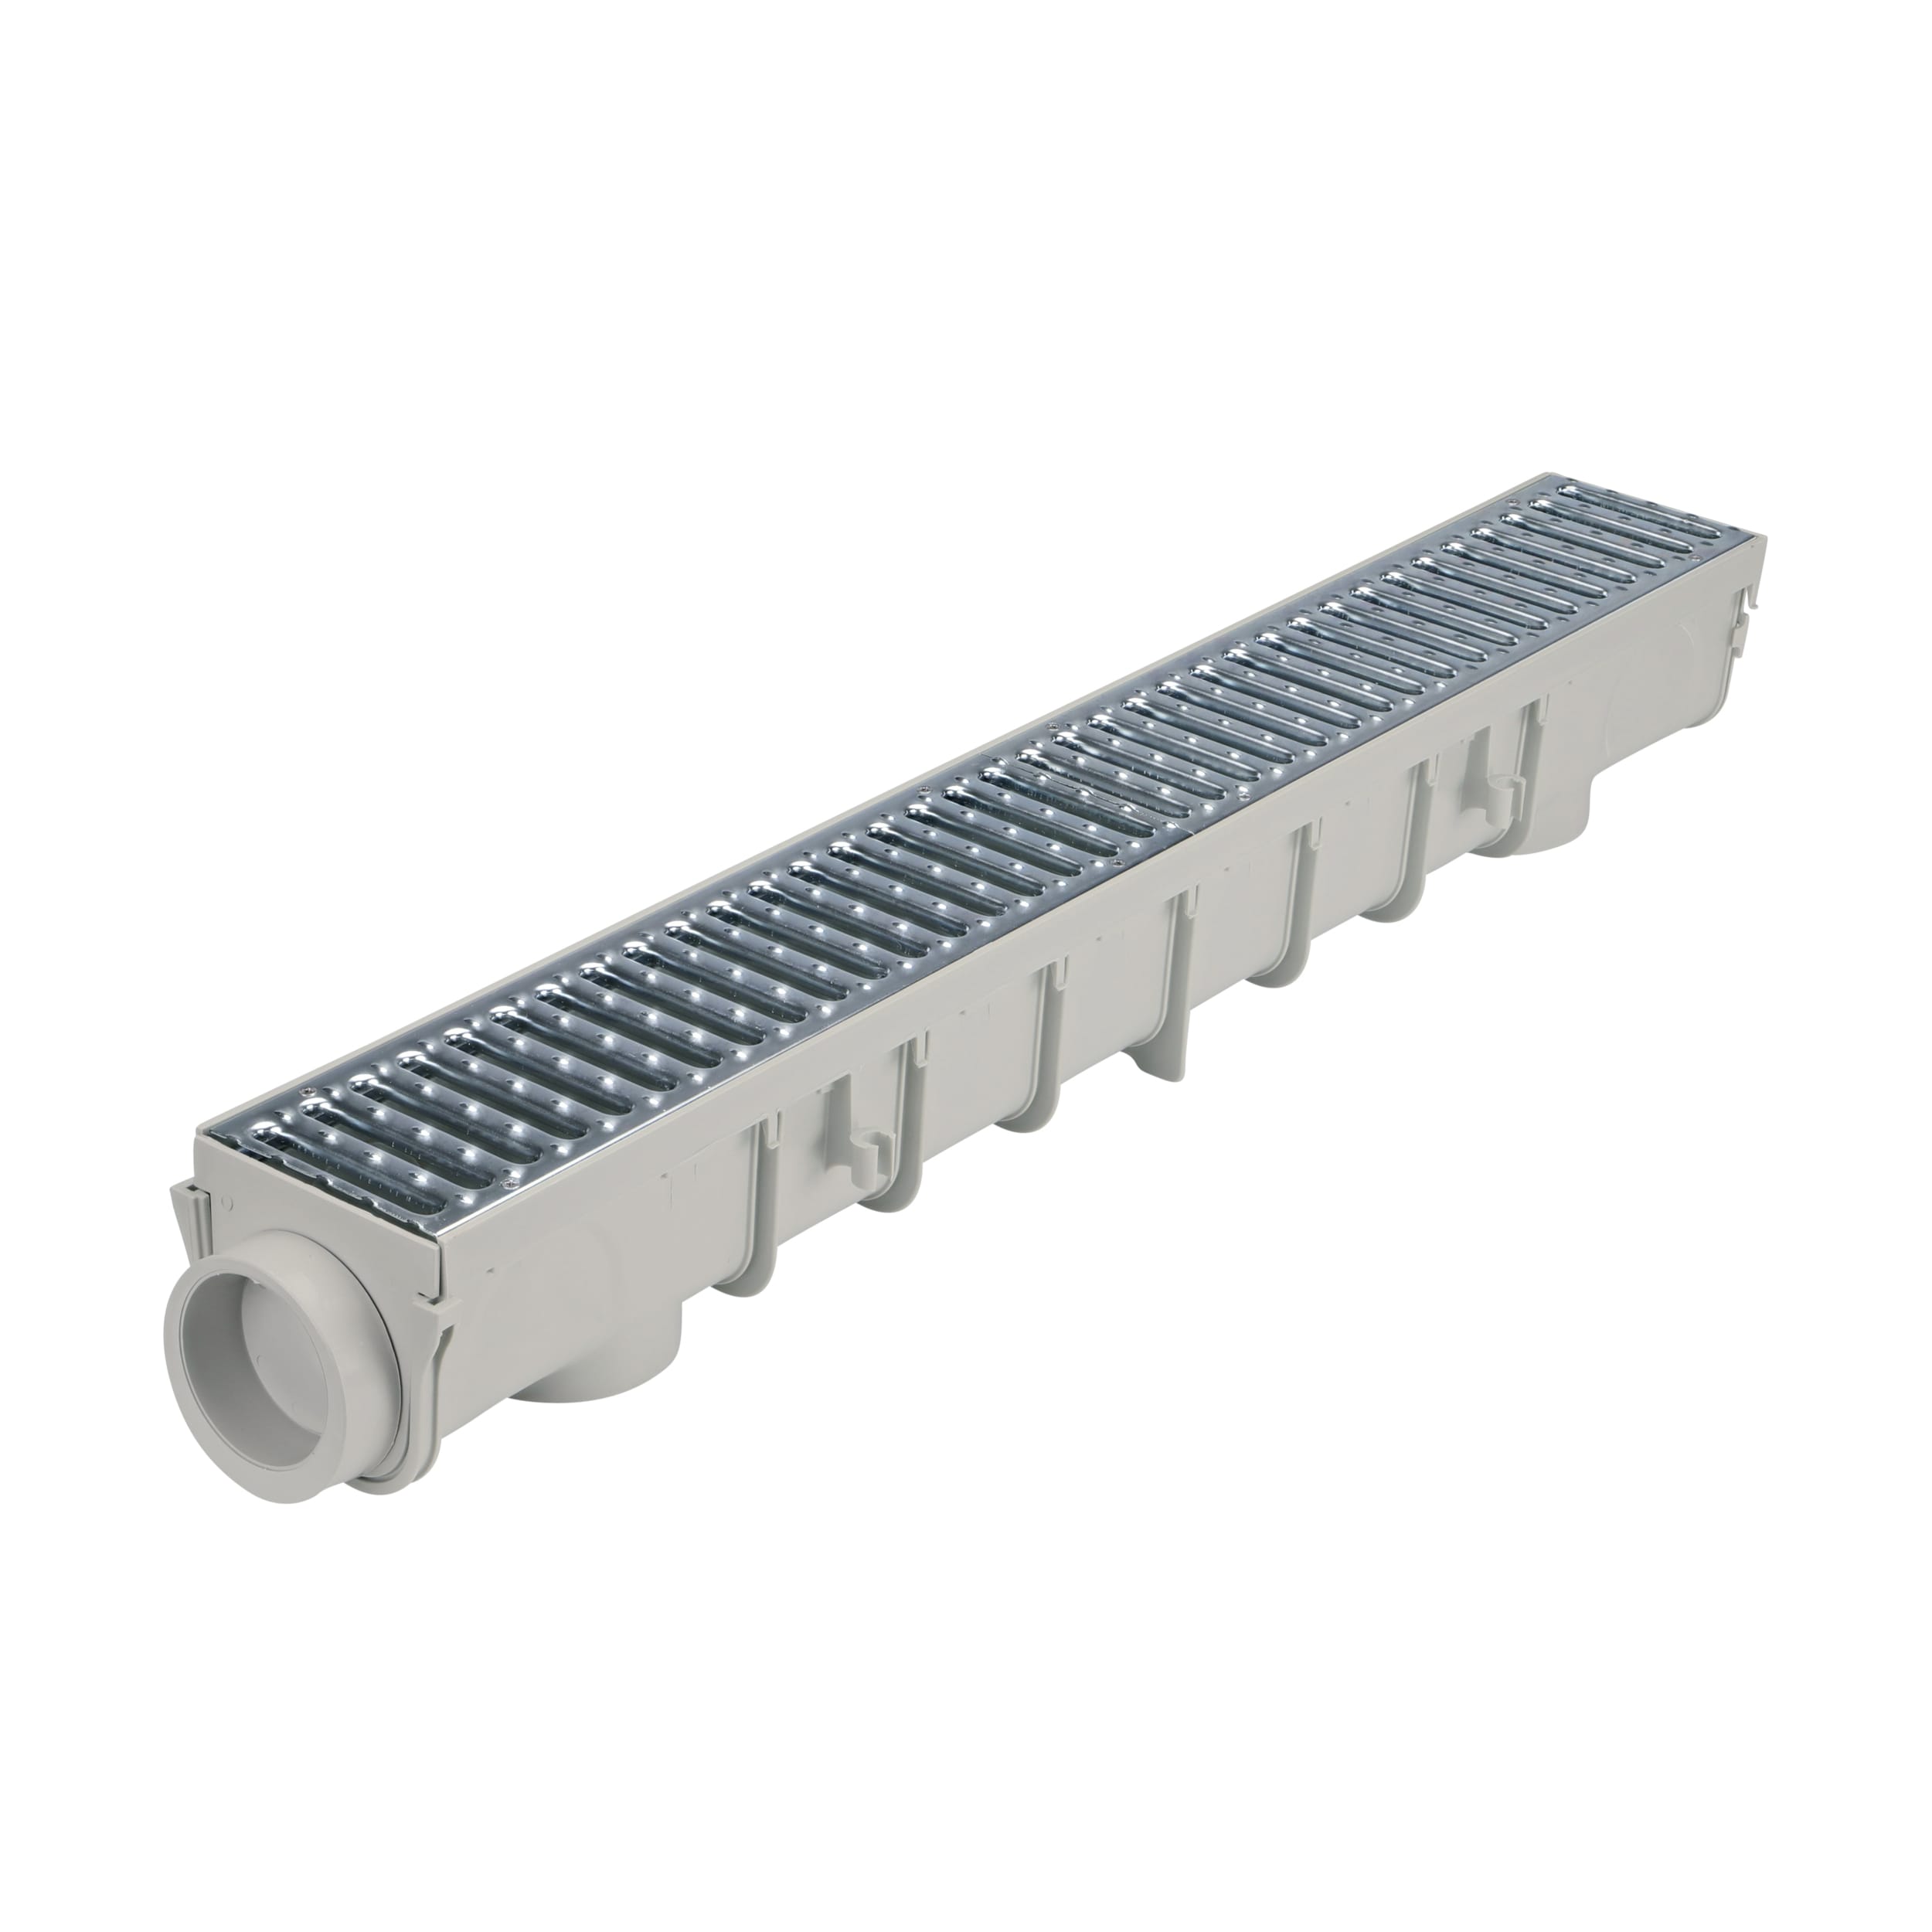 Nds 5 In Pro Channel Drains And Grates, Drain Tile Home Depot